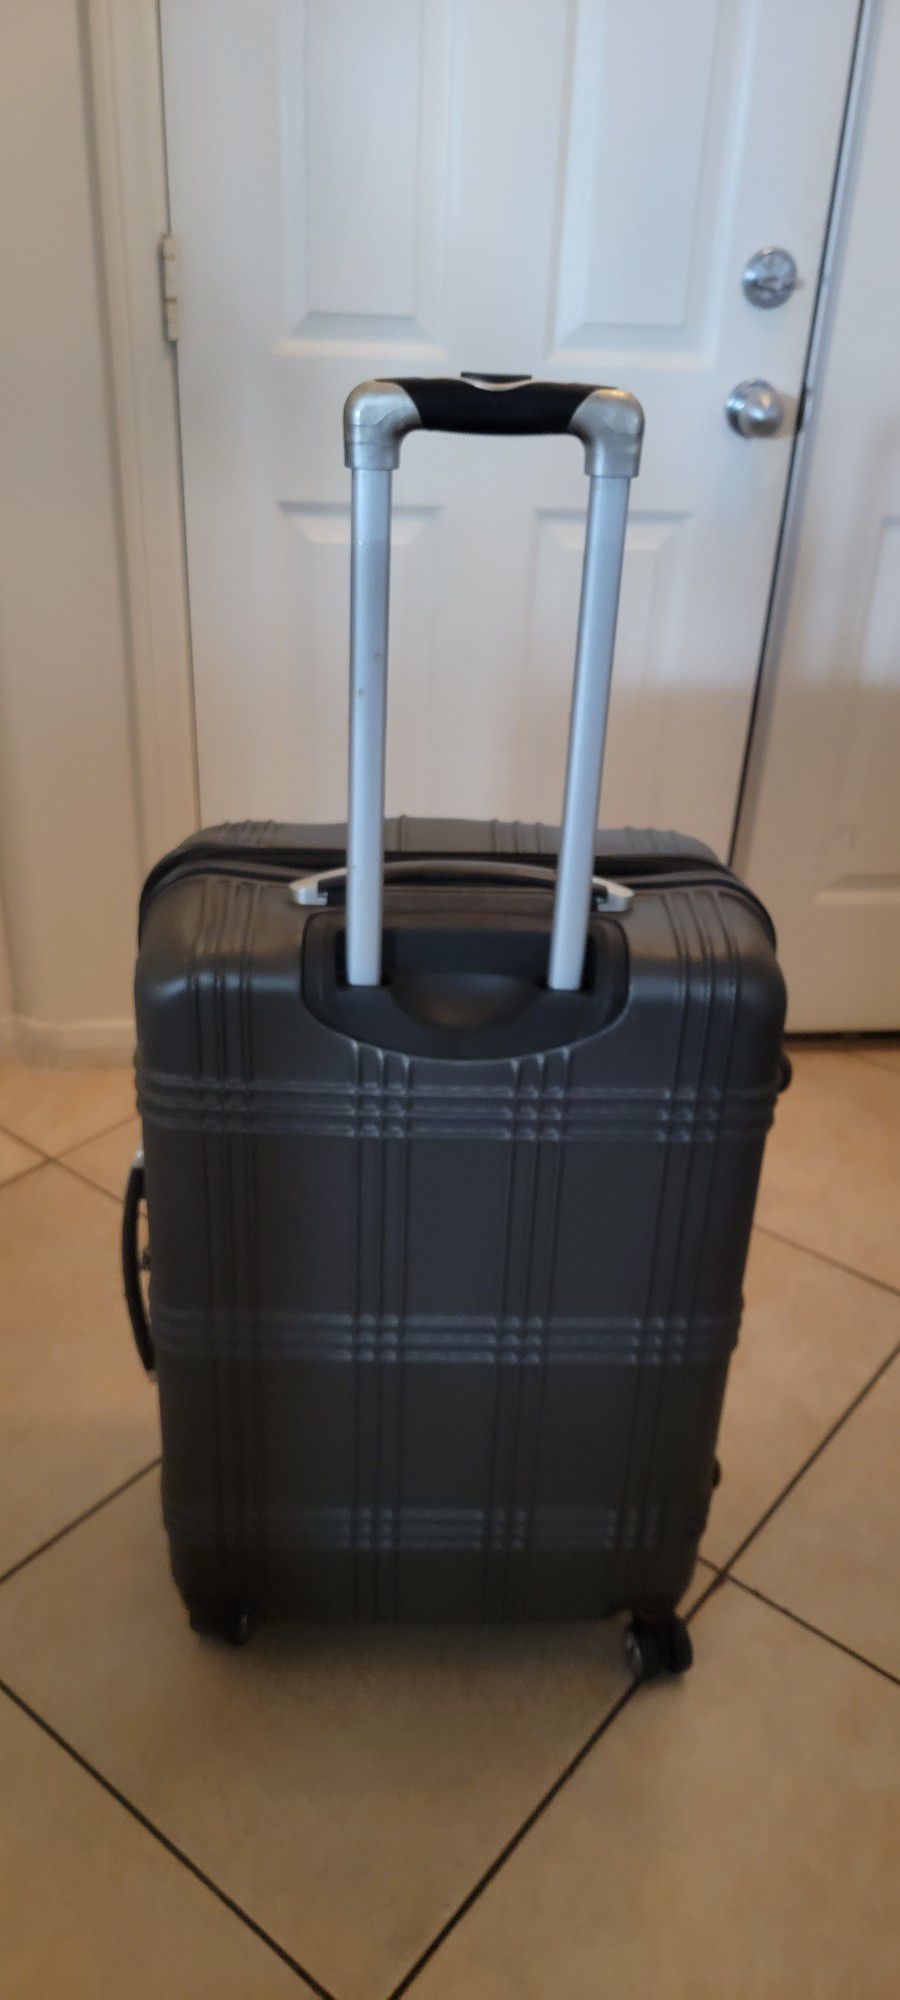 Movera Hawaii Wheel Hard Case Spinner Luggage for Sale in Las Vegas, NV ...